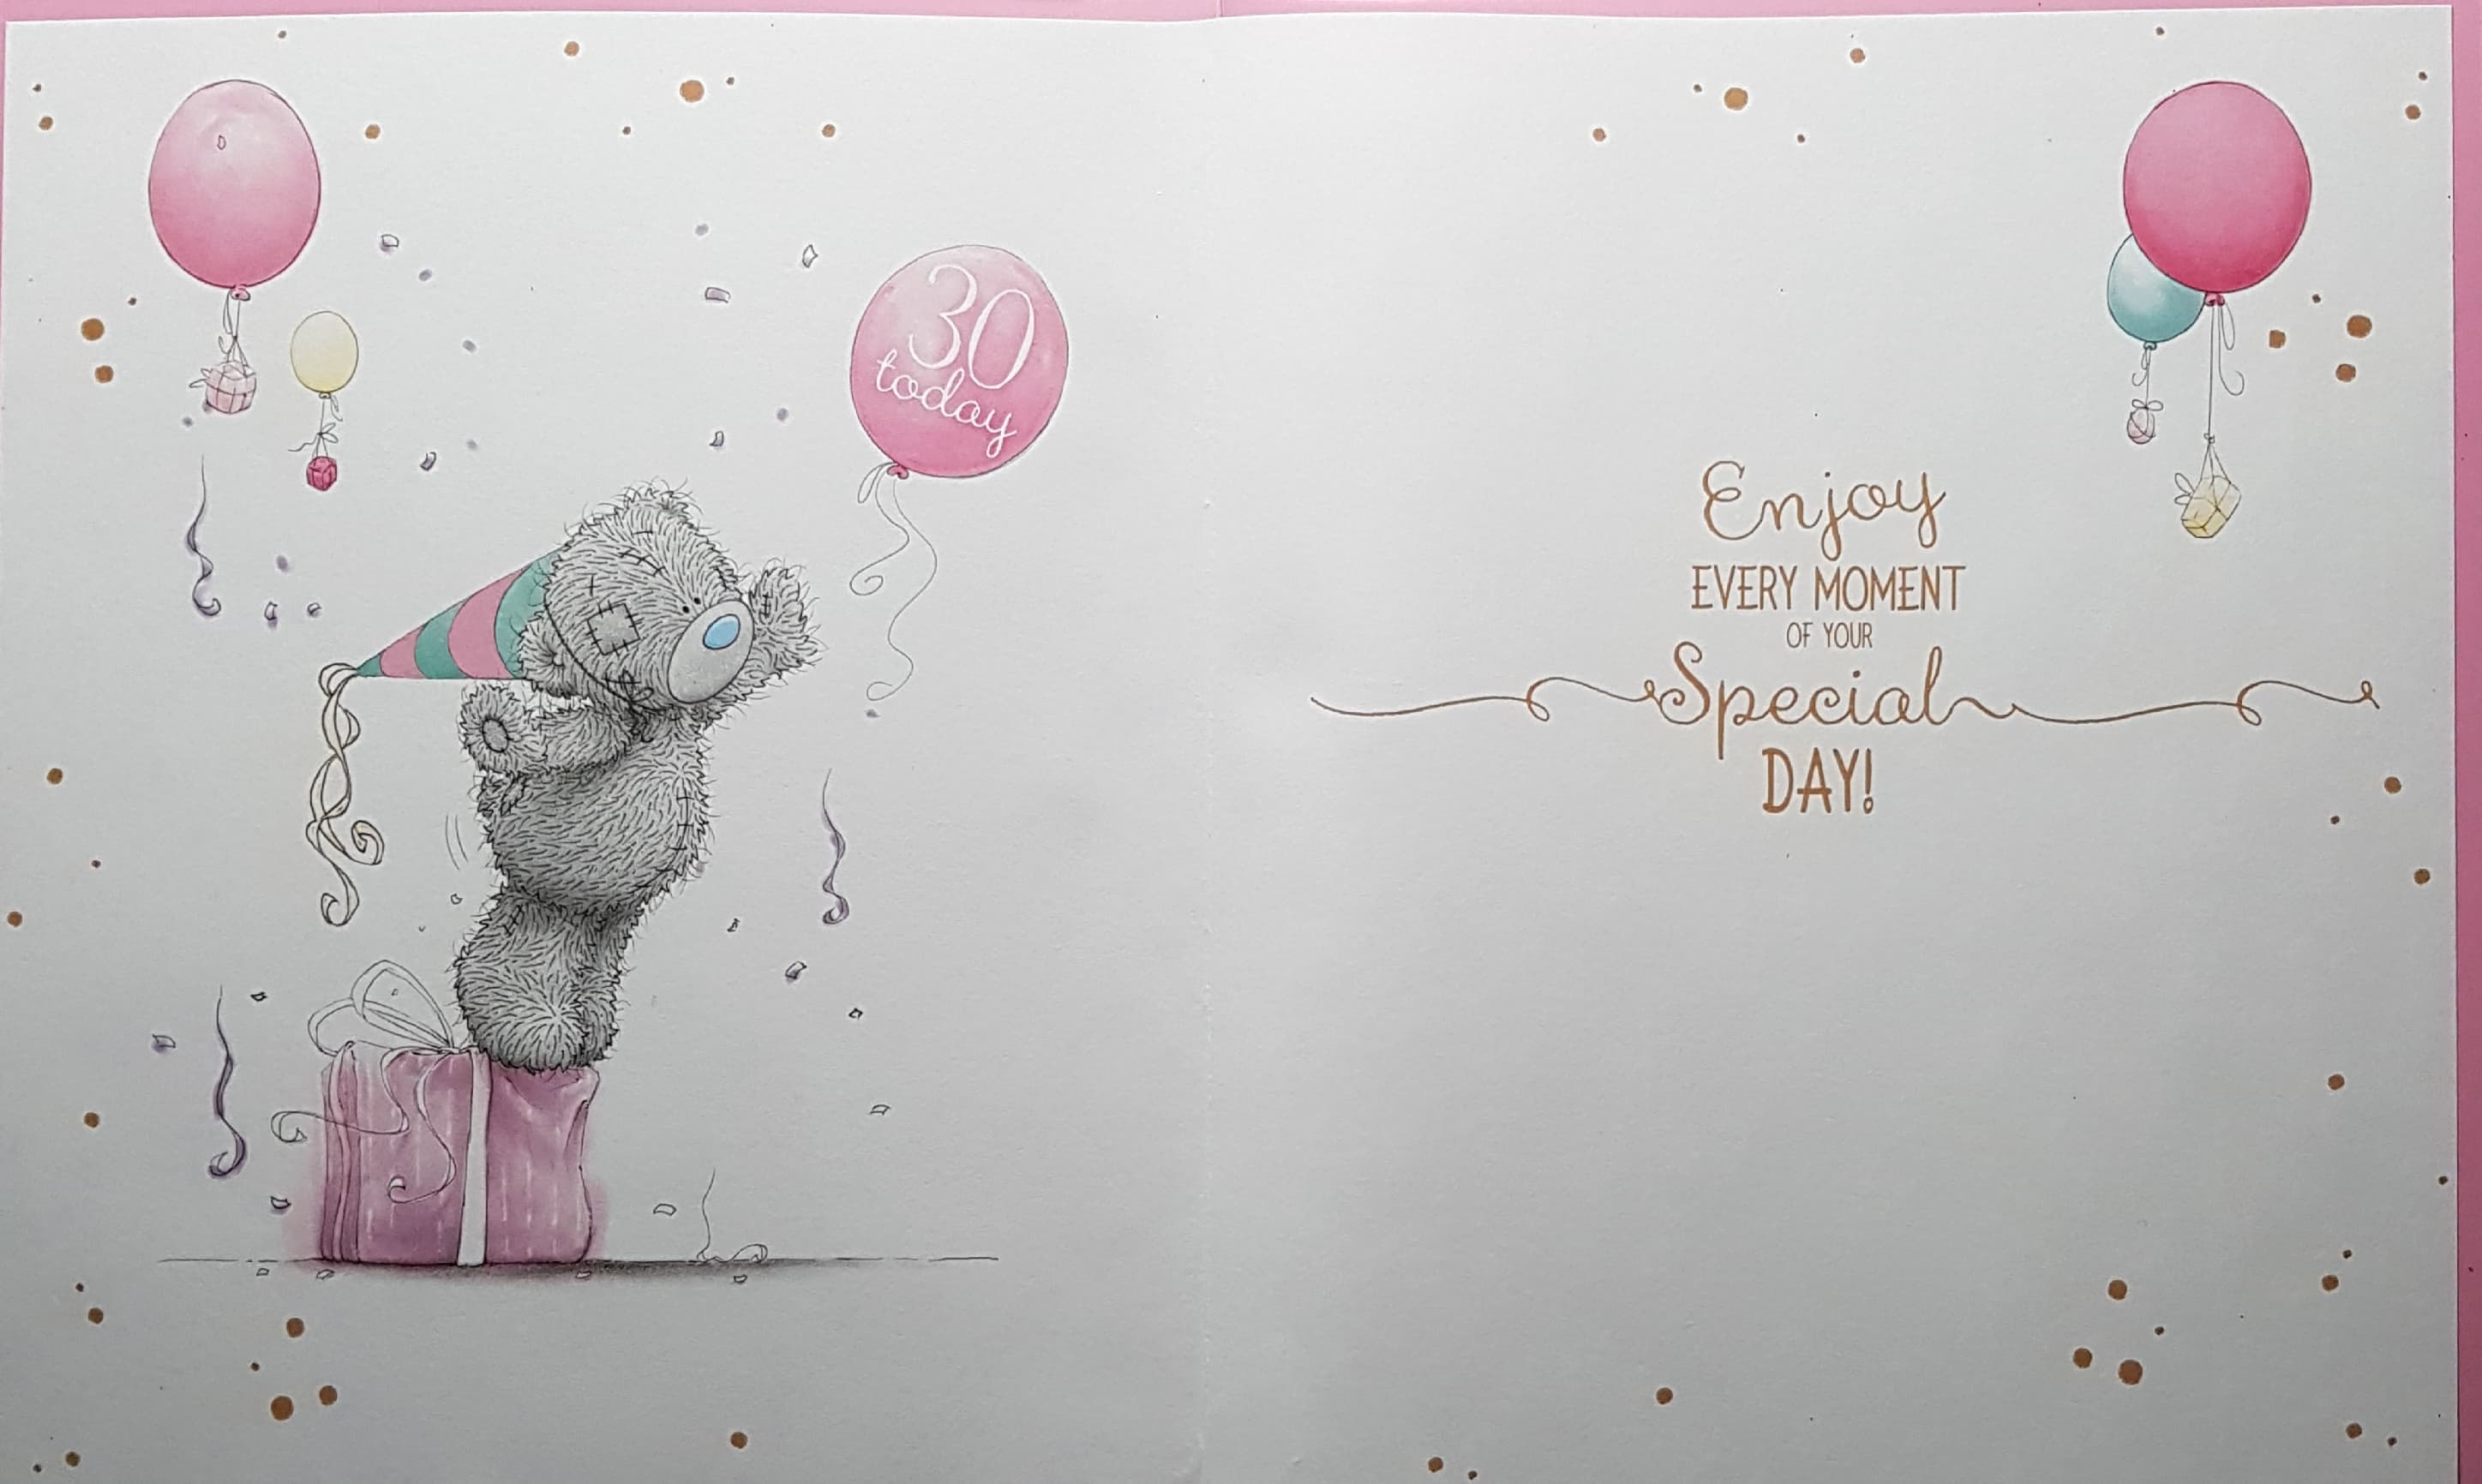 Age 30 Birthday Card - Balloons With A Pink Bow (A Card In A Box)